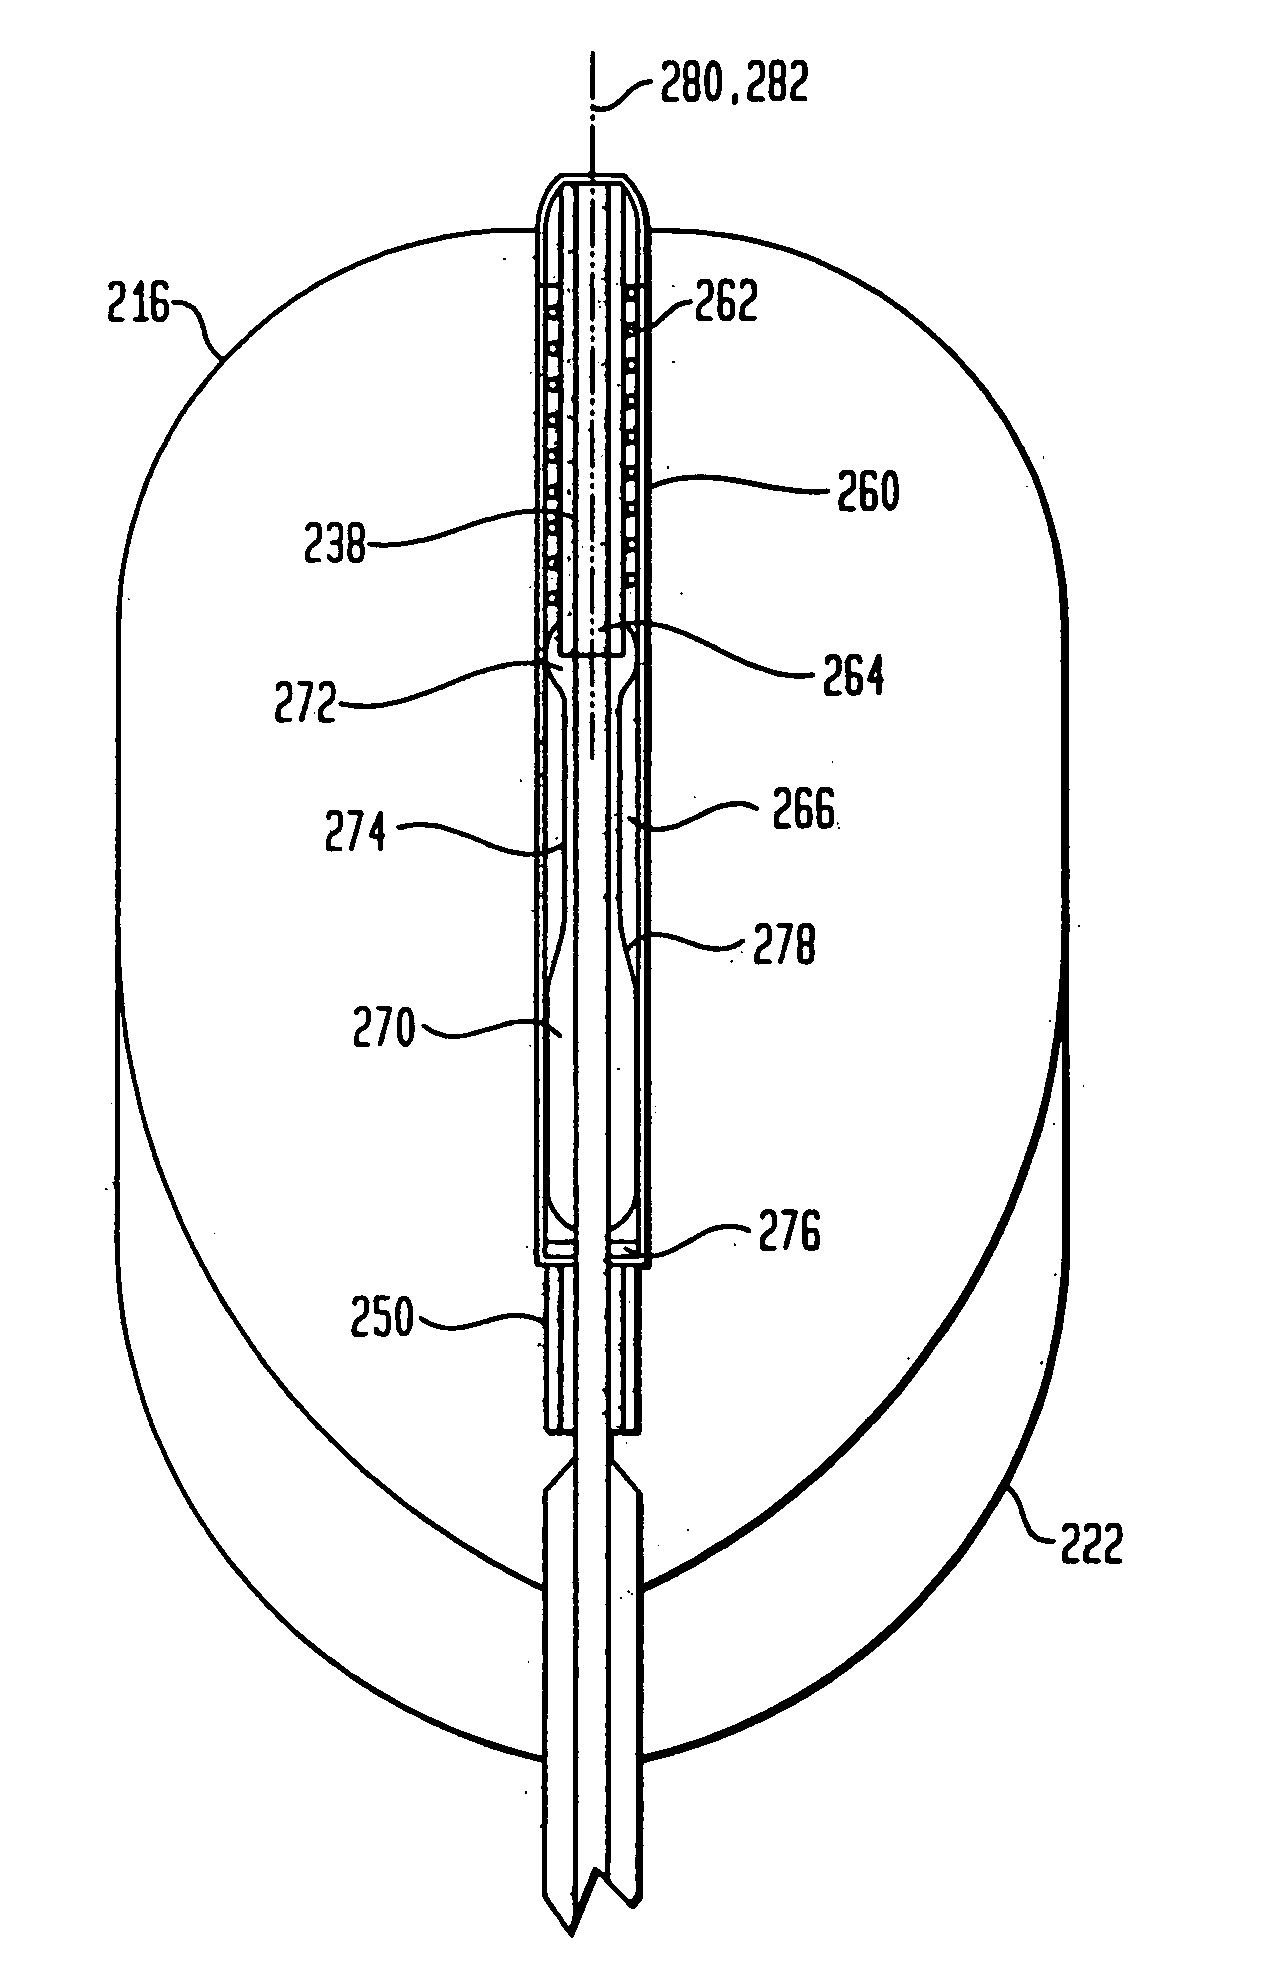 Balloon alignment and collapsing system